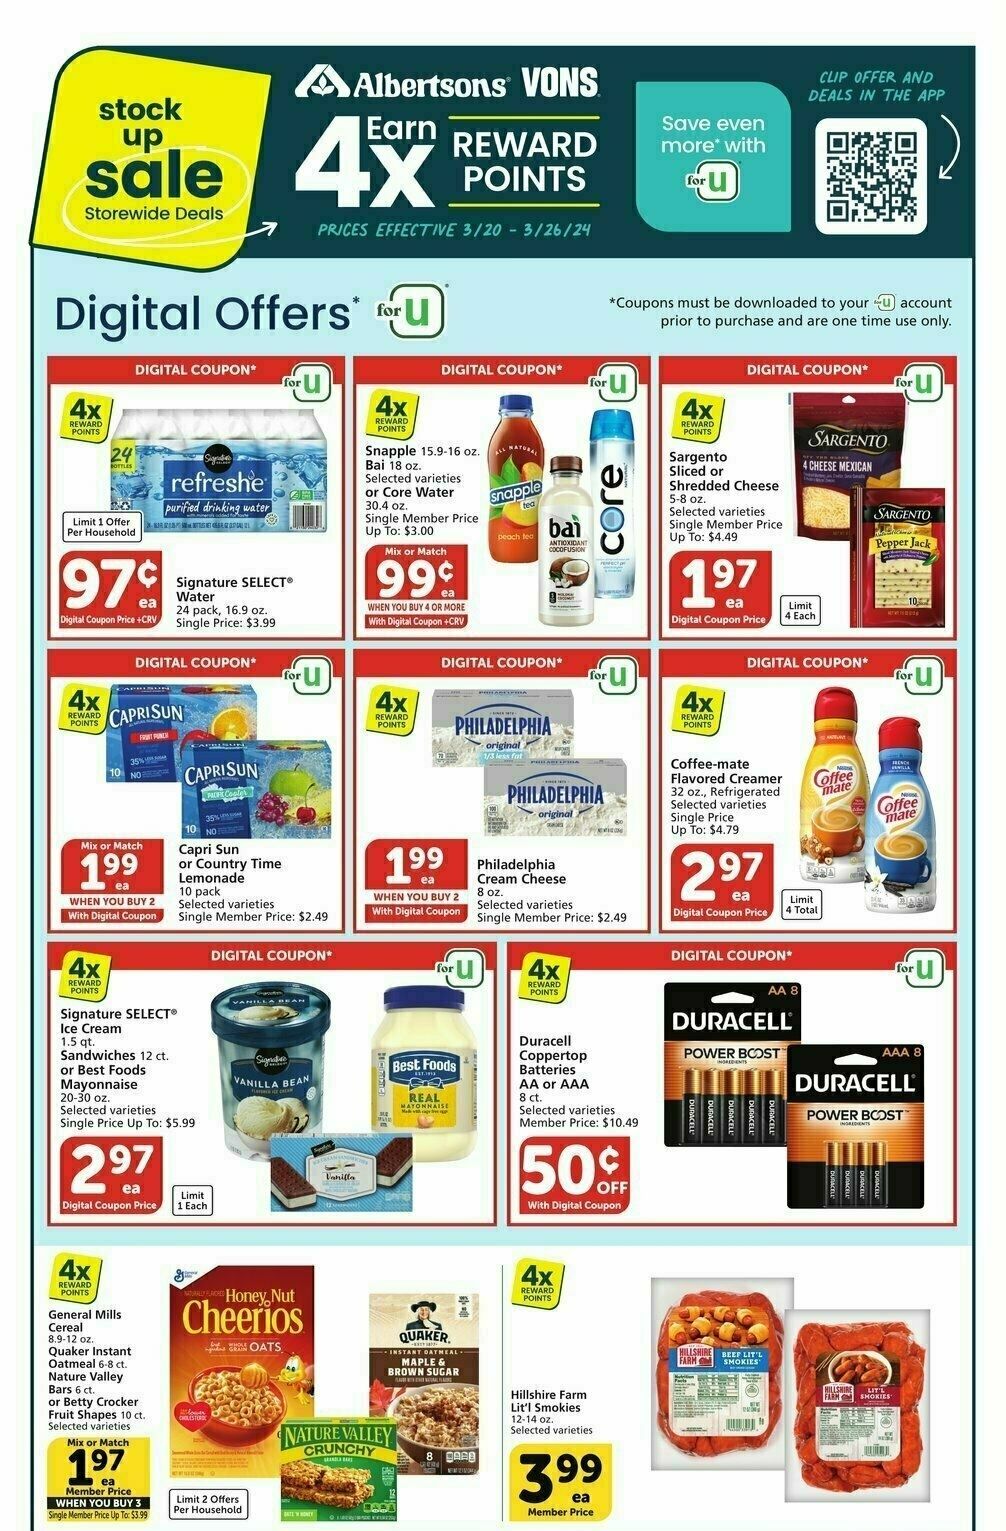 Vons Stock Up Sale Weekly Ad from March 20